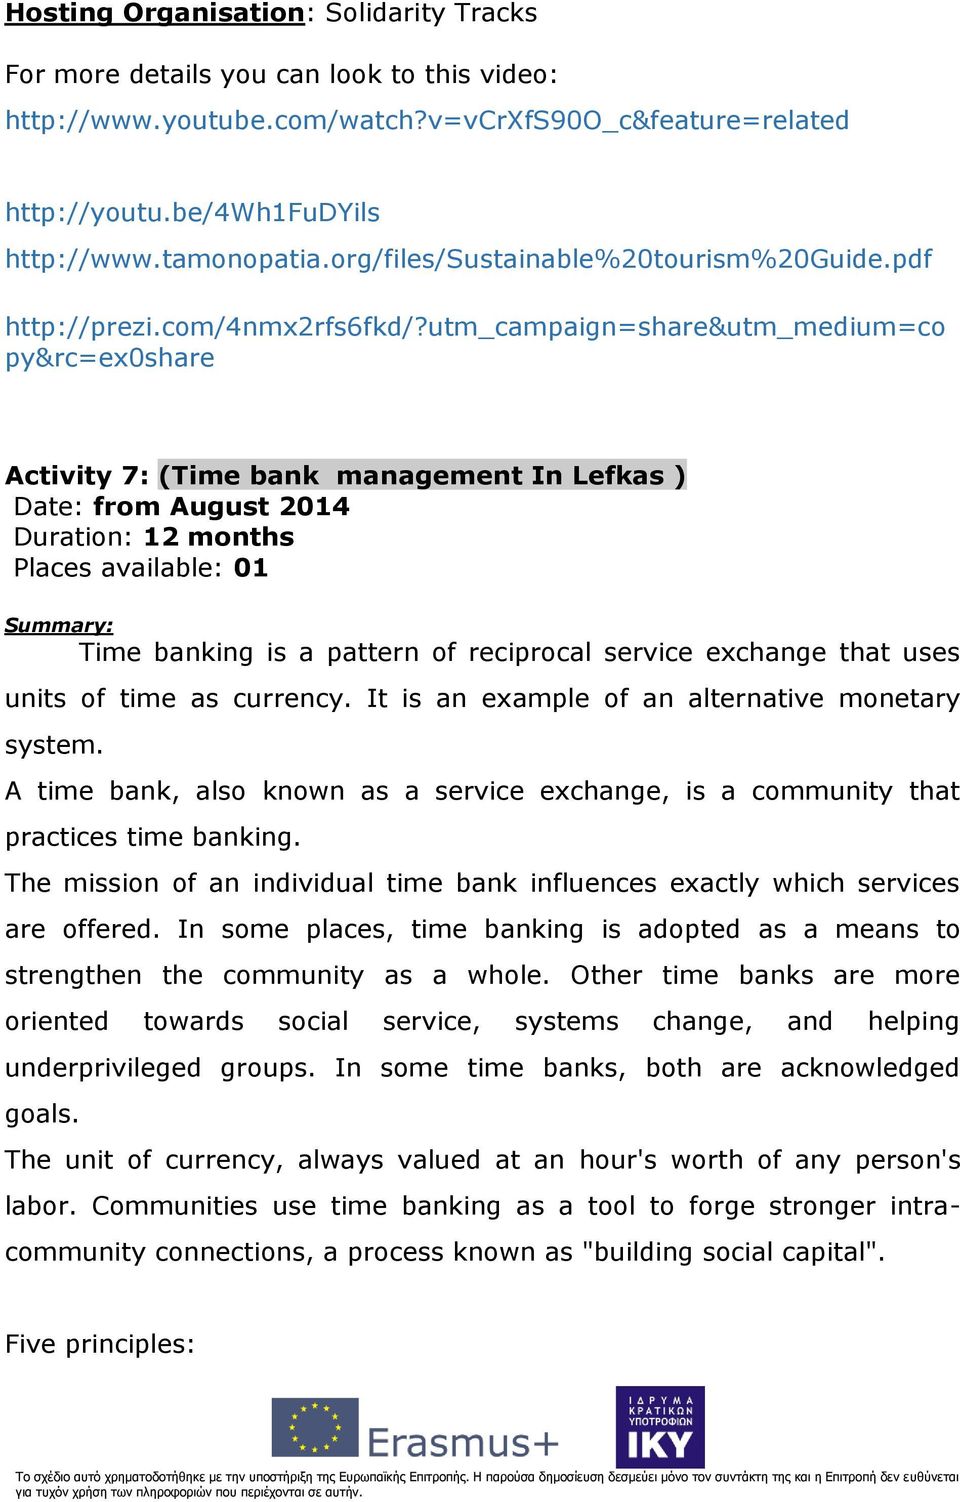 utm_campaign=share&utm_medium=co py&rc=ex0share Activity 7: (Time bank management In Lefkas ) Date: from August 2014 Duration: 12 months Places available: 01 Summary: Time banking is a pattern of